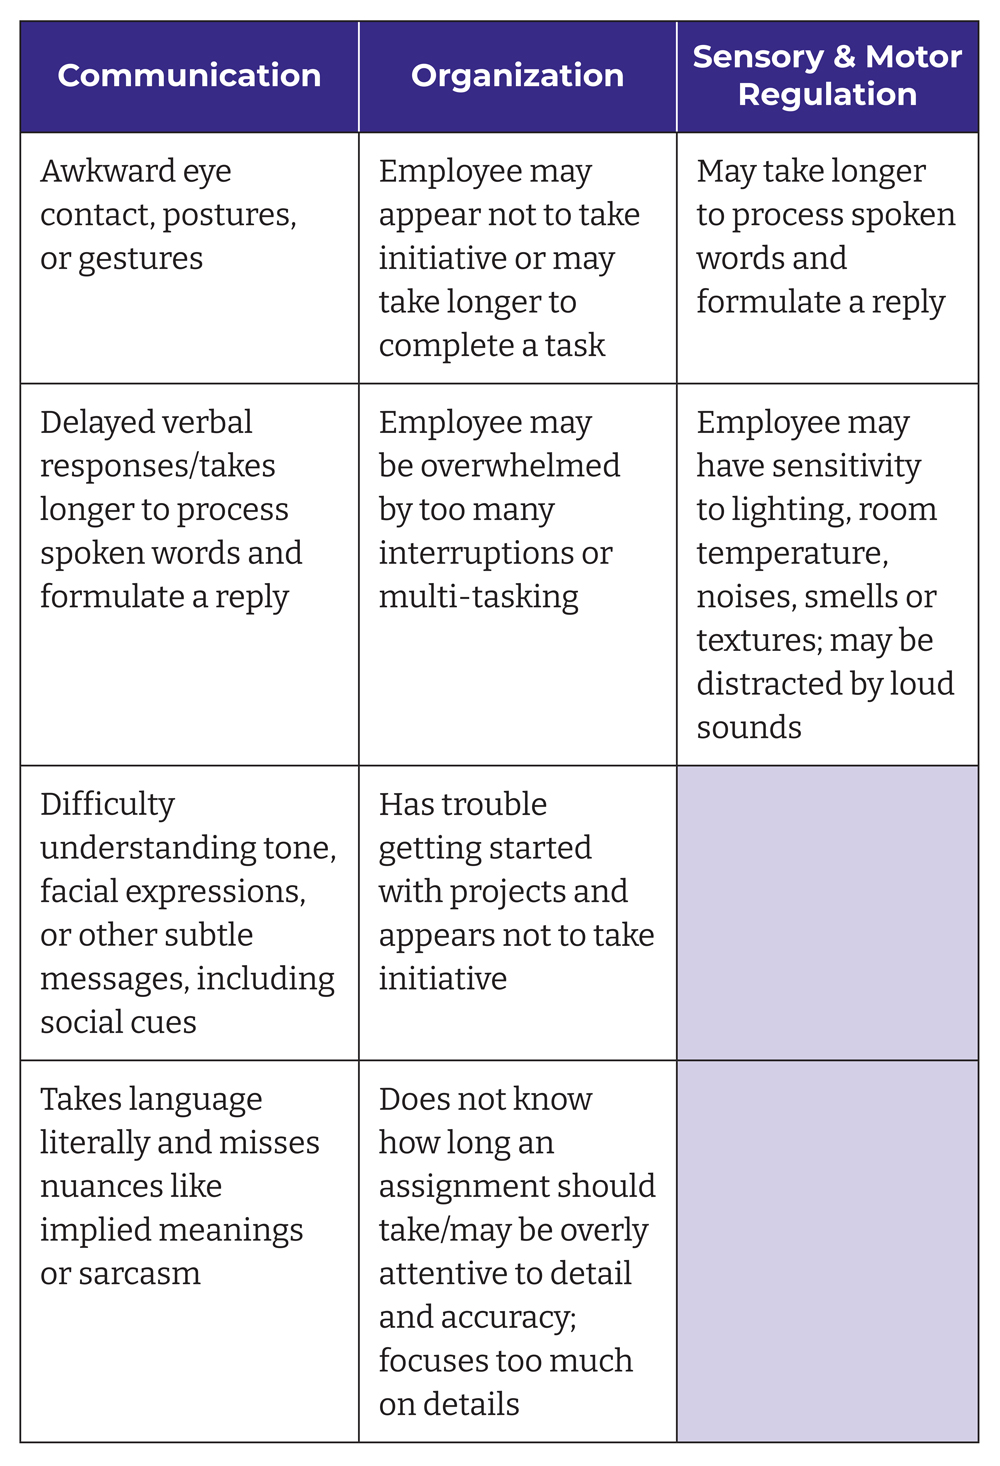 A chart that breaks down range of behaviors by the categories of Communication, Organization and Sensory & Motor Regulation.